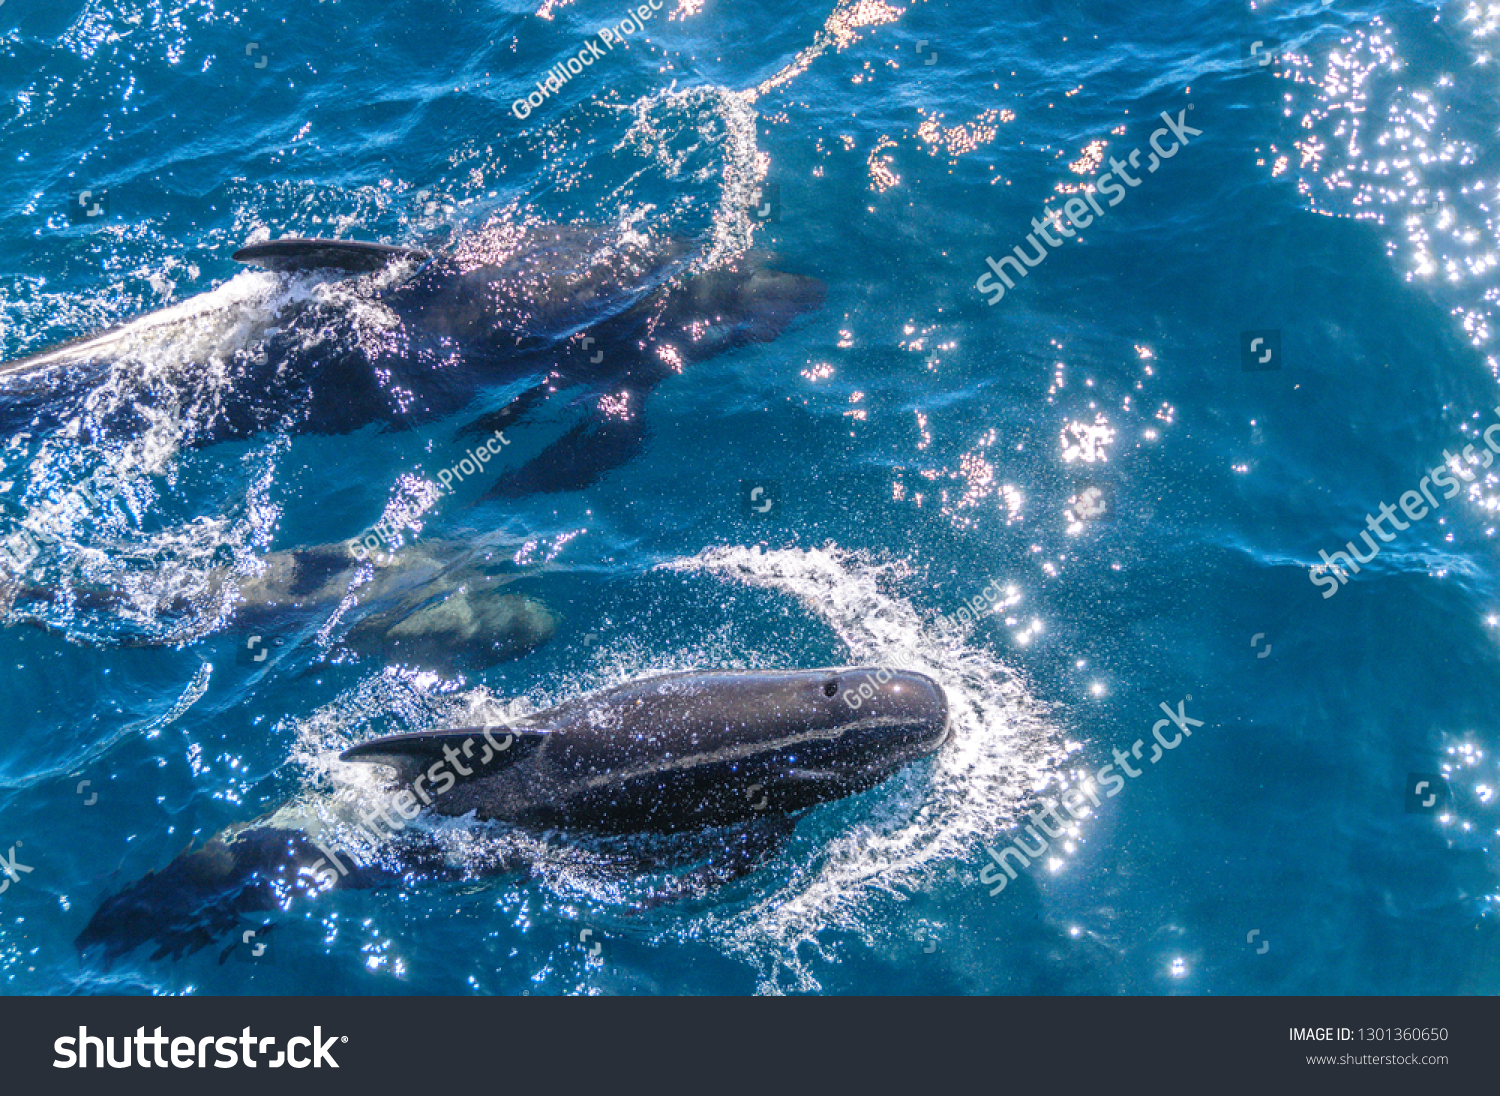 A group of Long-Finned Pilot Whales -Globicephala melas- swimming in the South Atlantic Ocean, near the Falkland Islands #1301360650